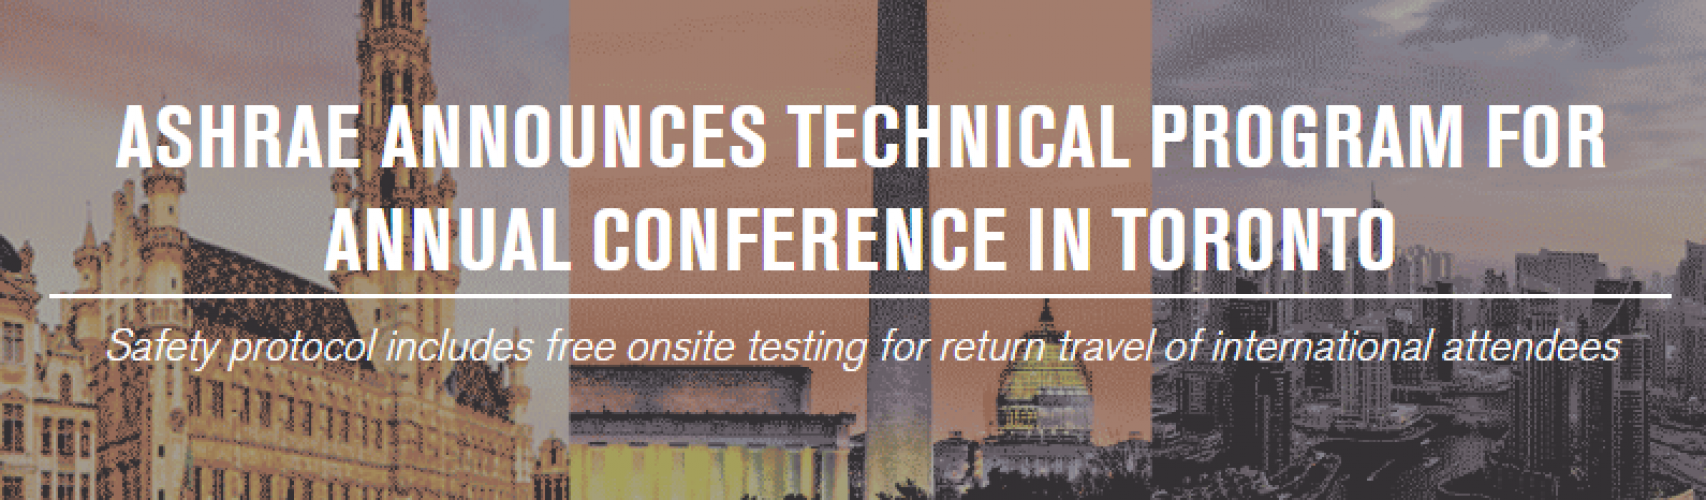 ashrae-announces-technical-program-for-annual-conference-in-toronto